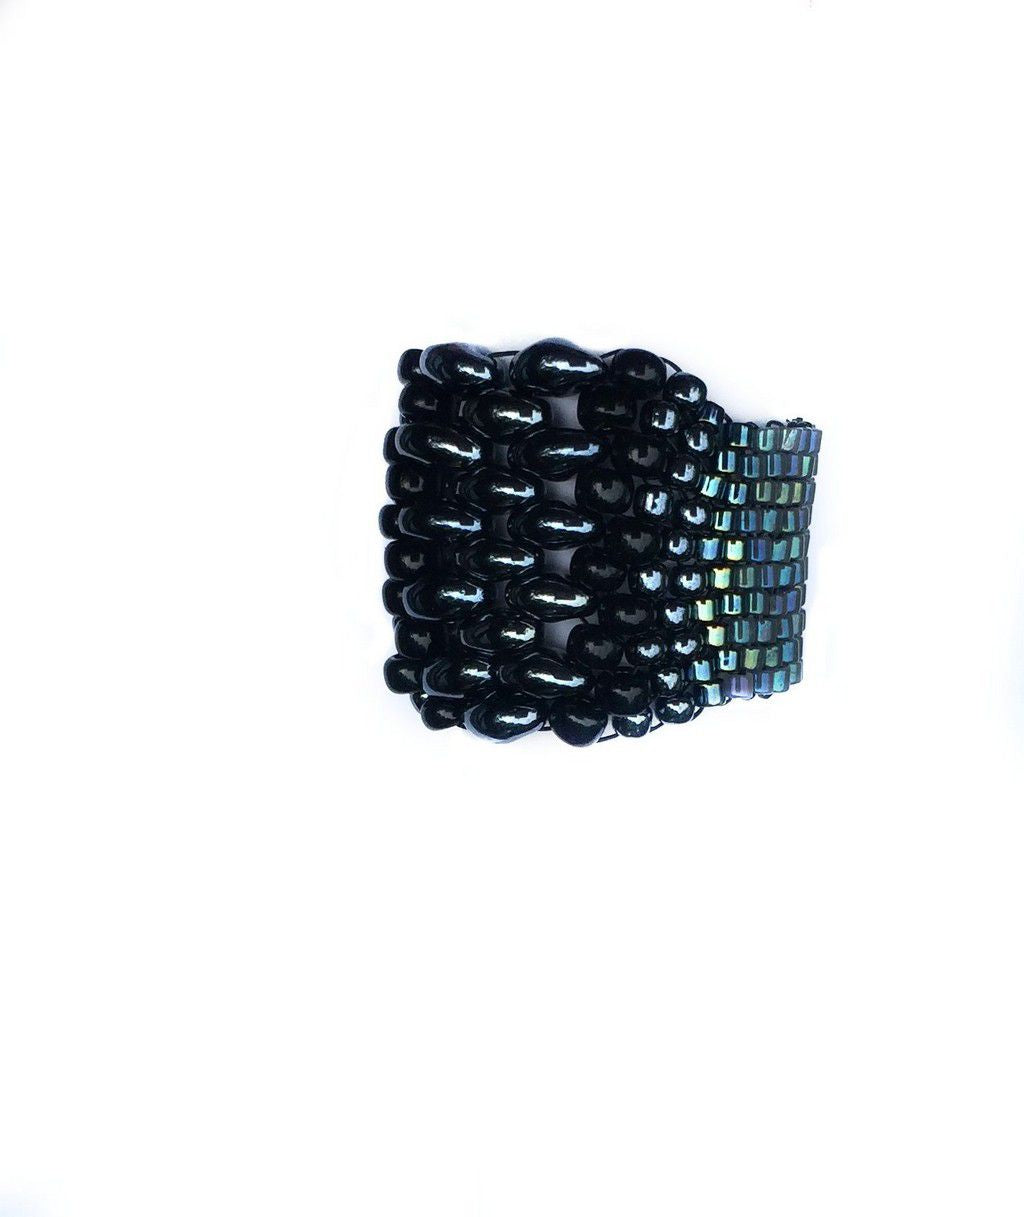 wide band ring fully beaded in hematite, black, and blue, super comfortable